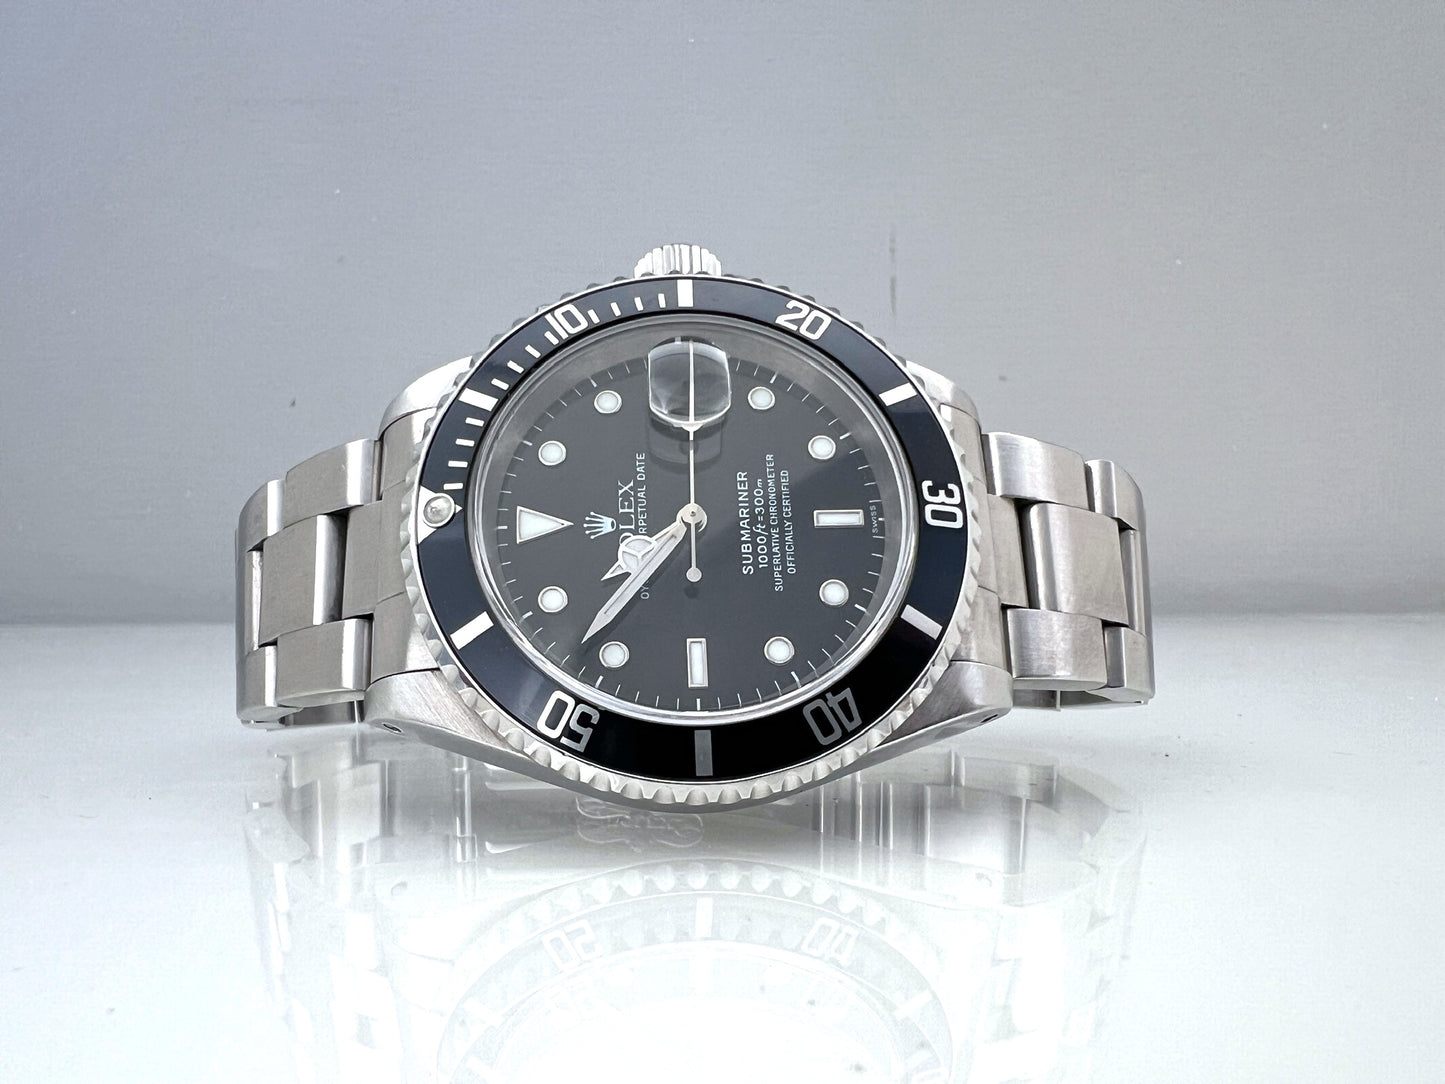 Rolex Submariner 16610 only "SWISS" dial